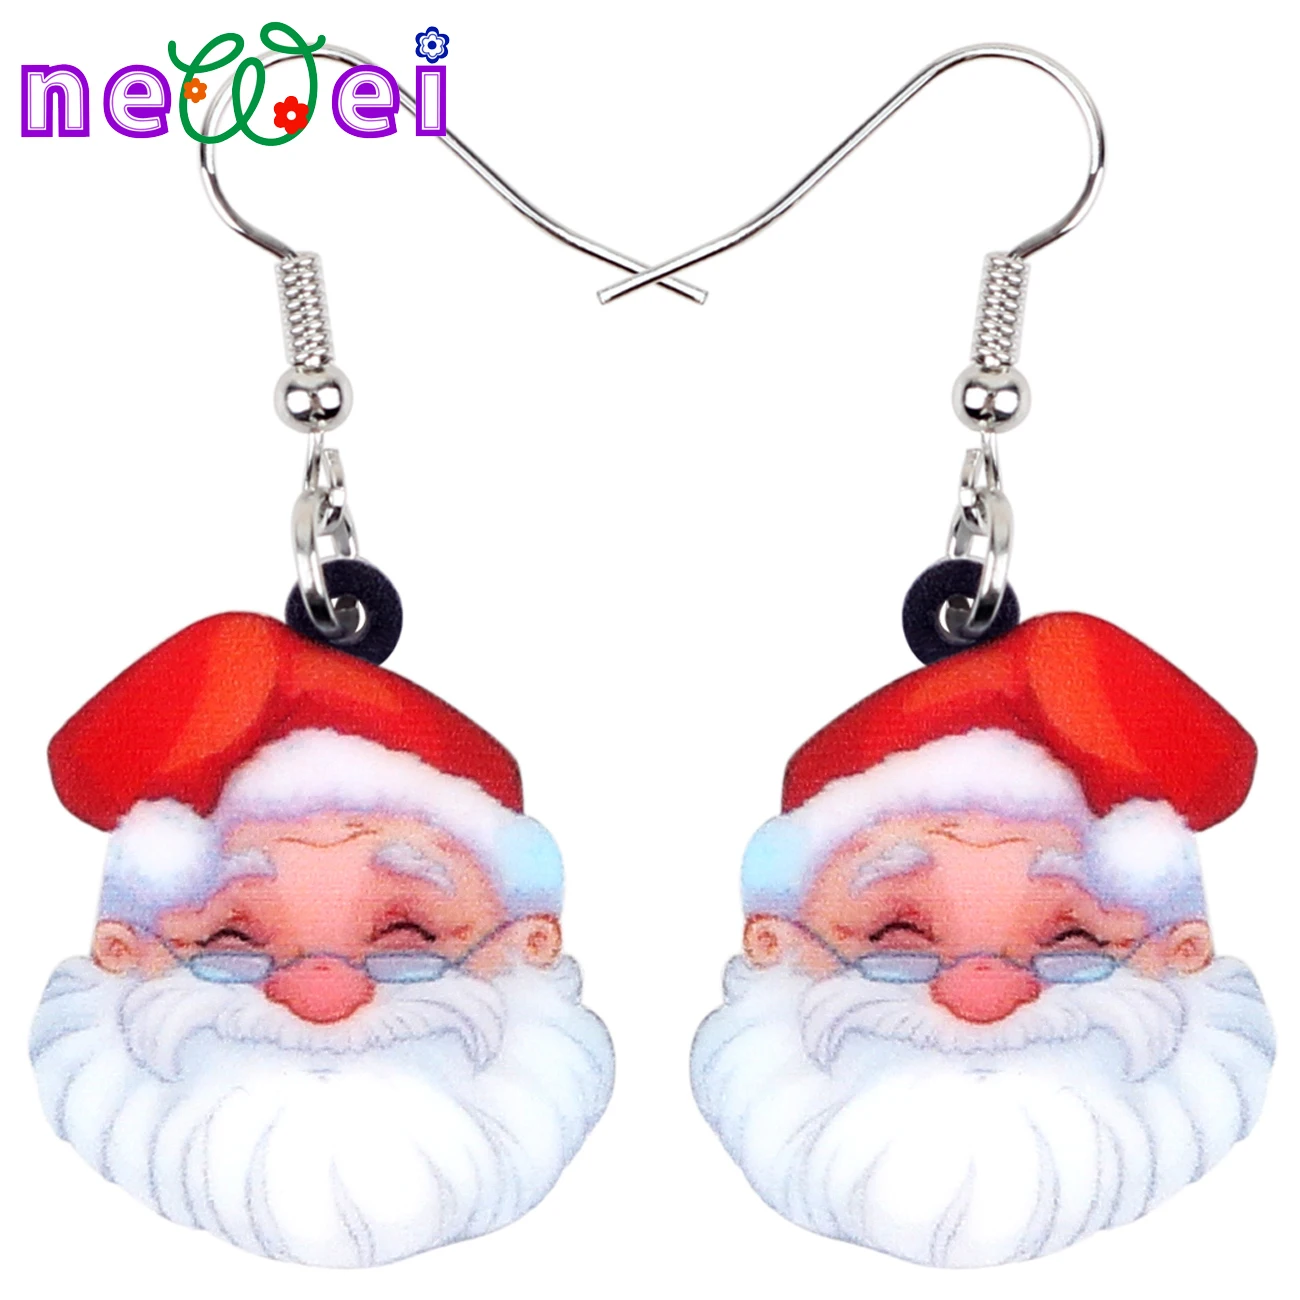 

Acrylic Sweet Christmas White Beard Santa Claus Earrings Drop Dangle Fashion Jewelry For Women Girls Teens Unique Charms Gifts, Multicolor